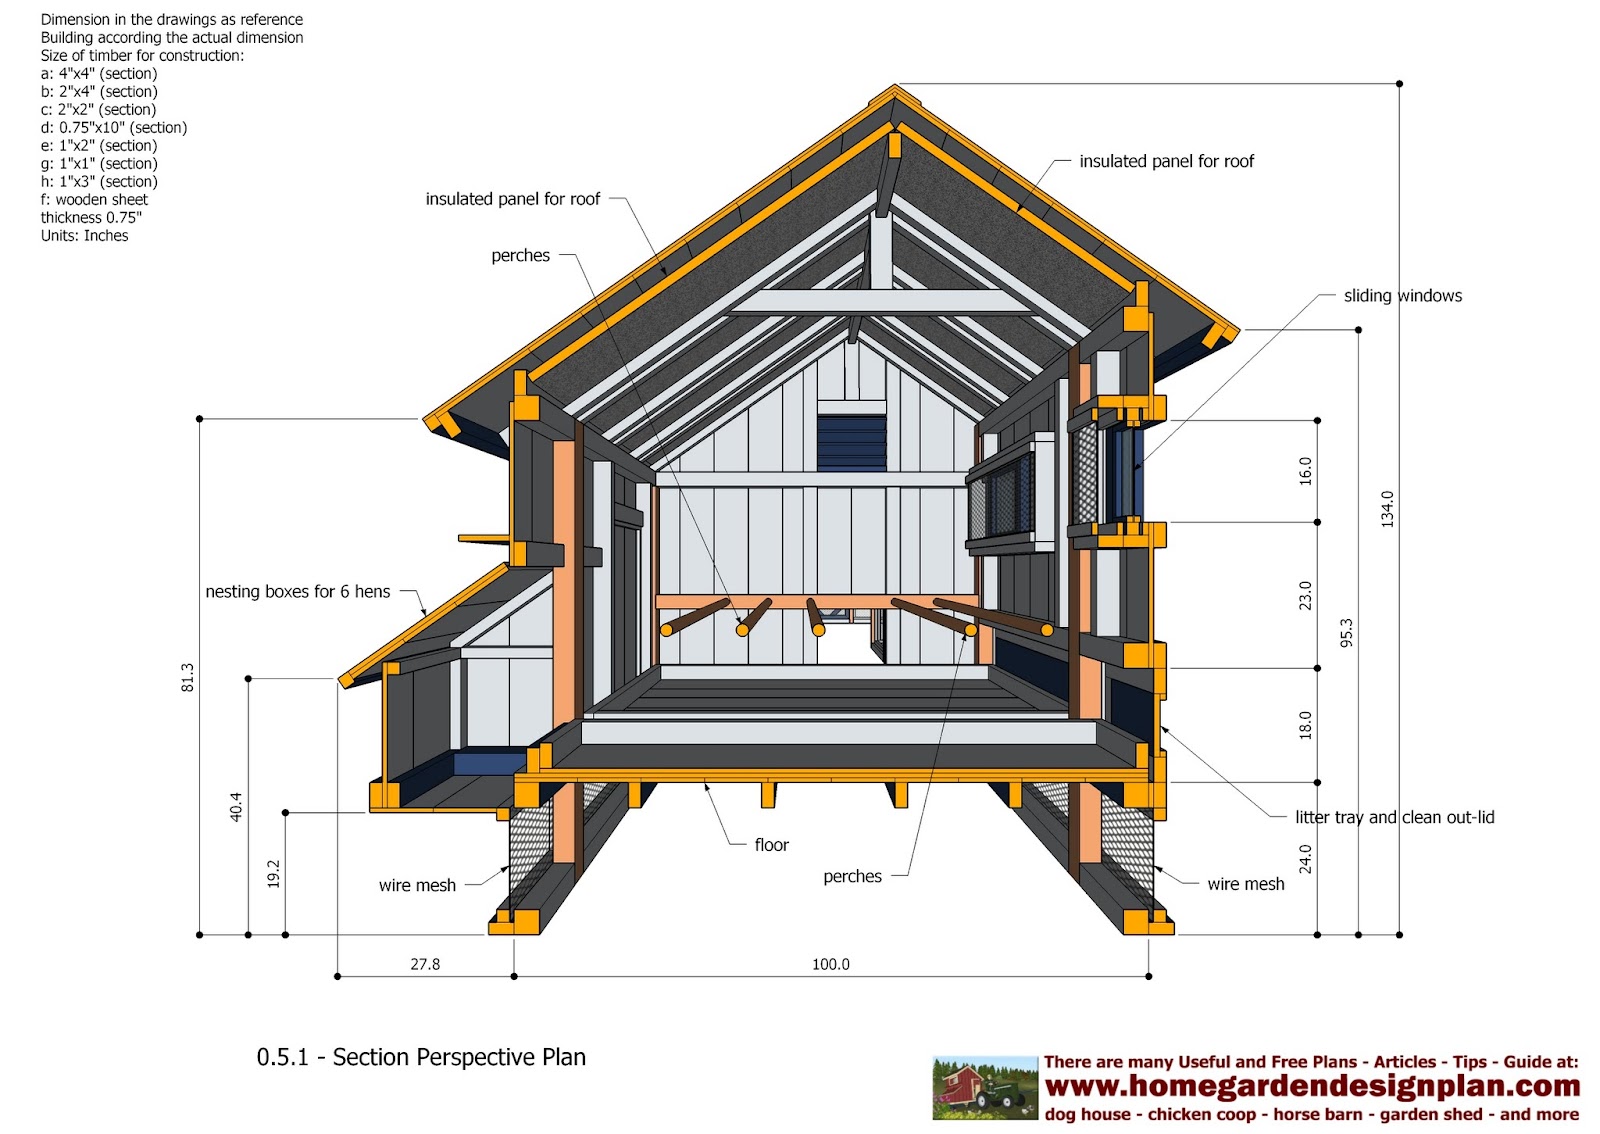 home garden plans: L200 - Large Chicken Coop Plans - How ...